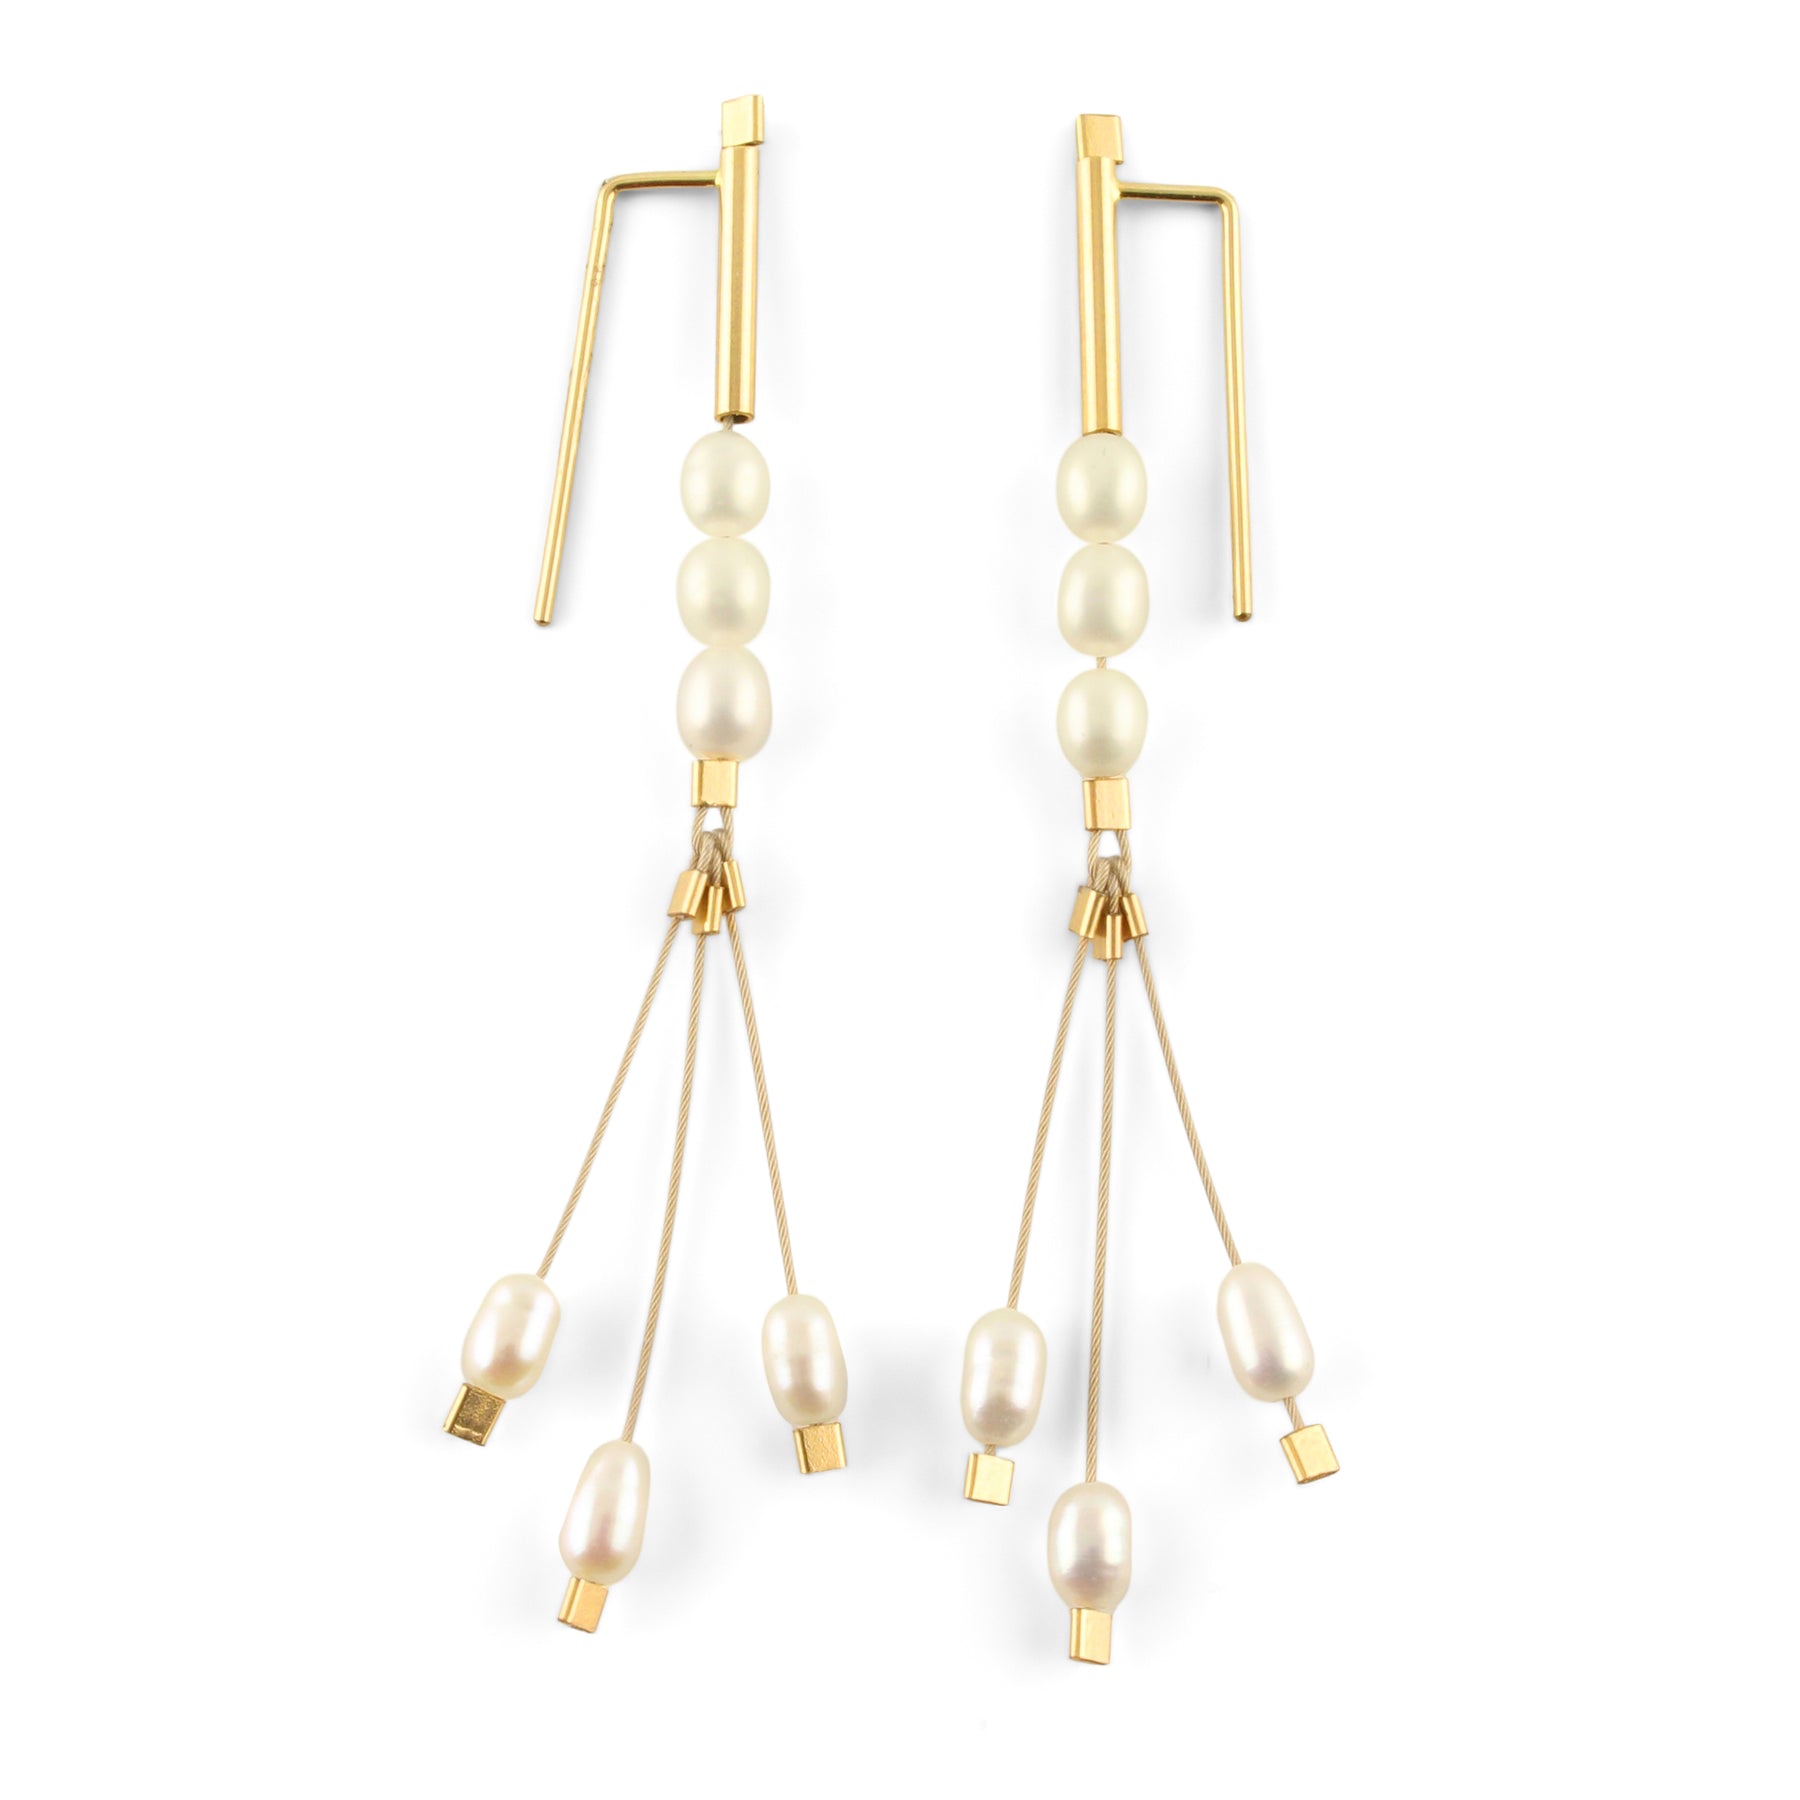 Aerial Large Earrings in Gold and Tourmaline